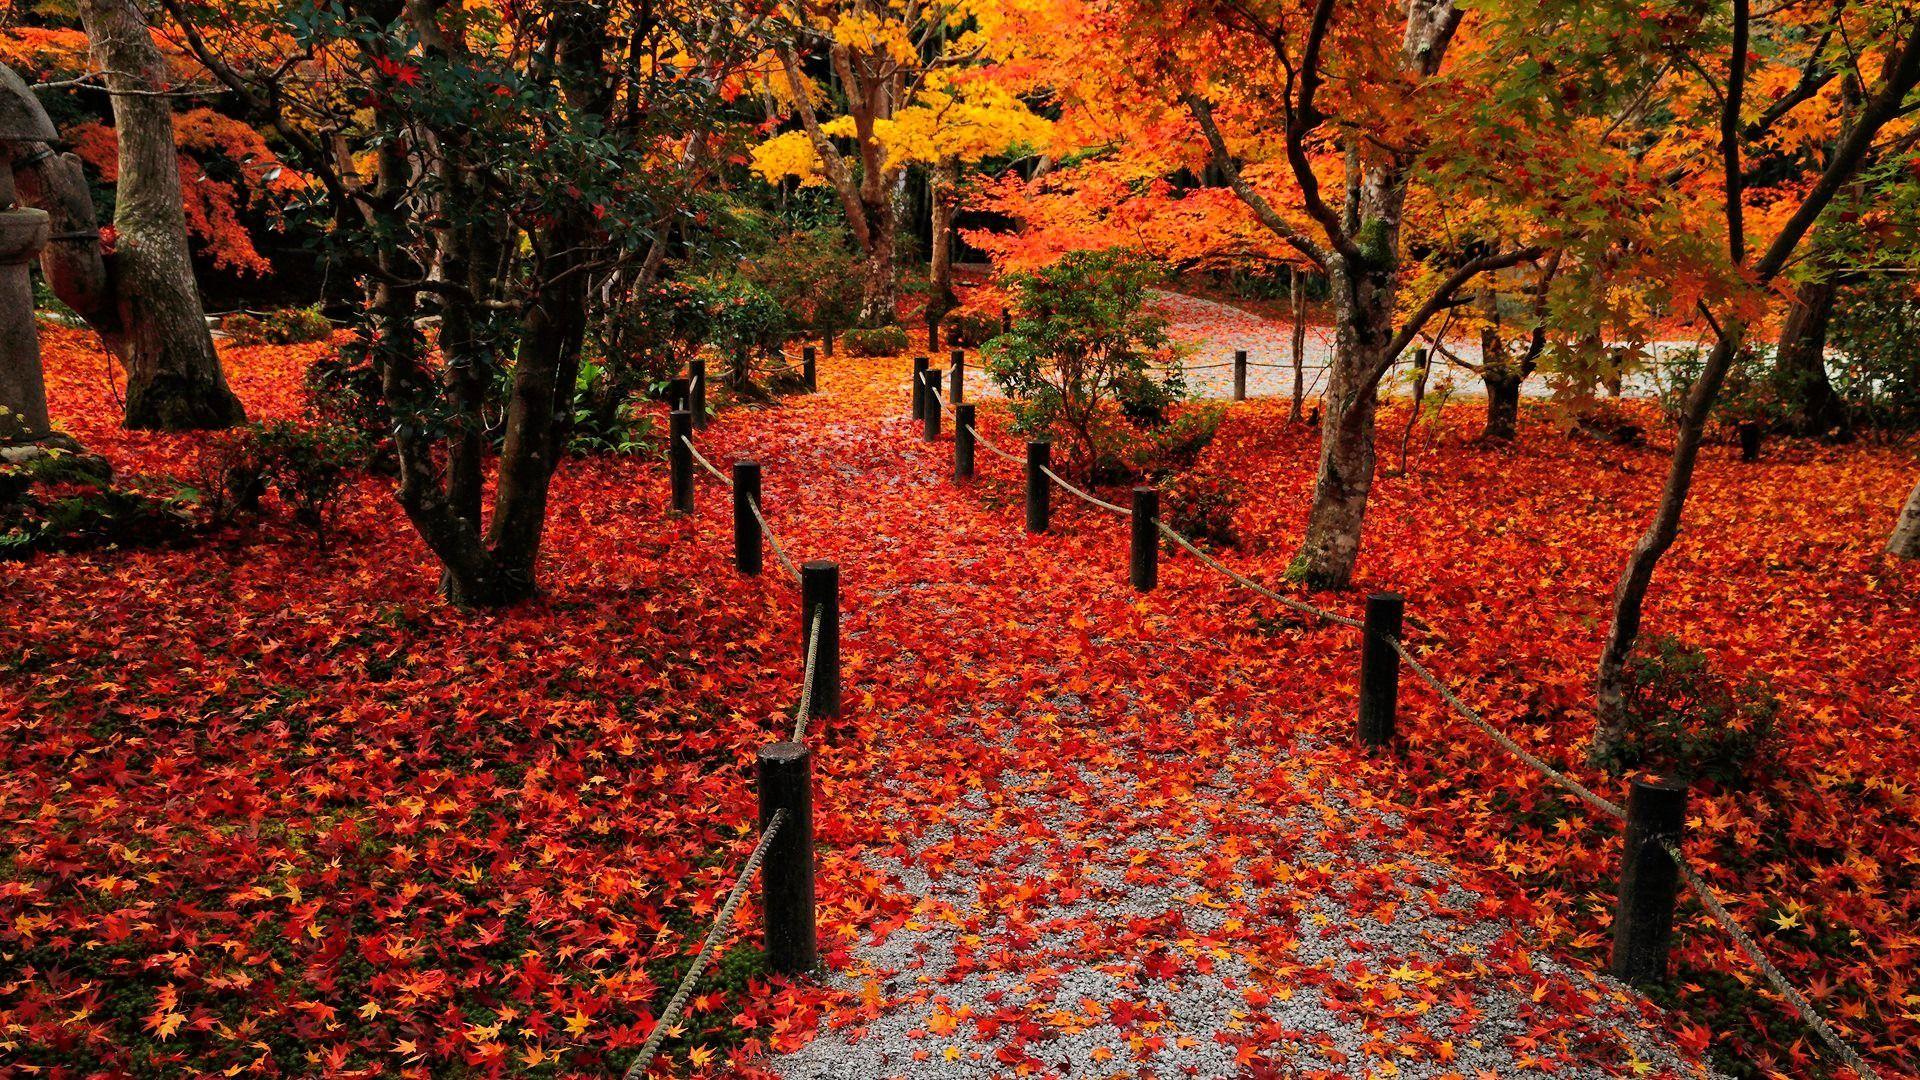 Autumn Leaves Wallpaper, Top Ranked Autumn Leaves Wallpaper